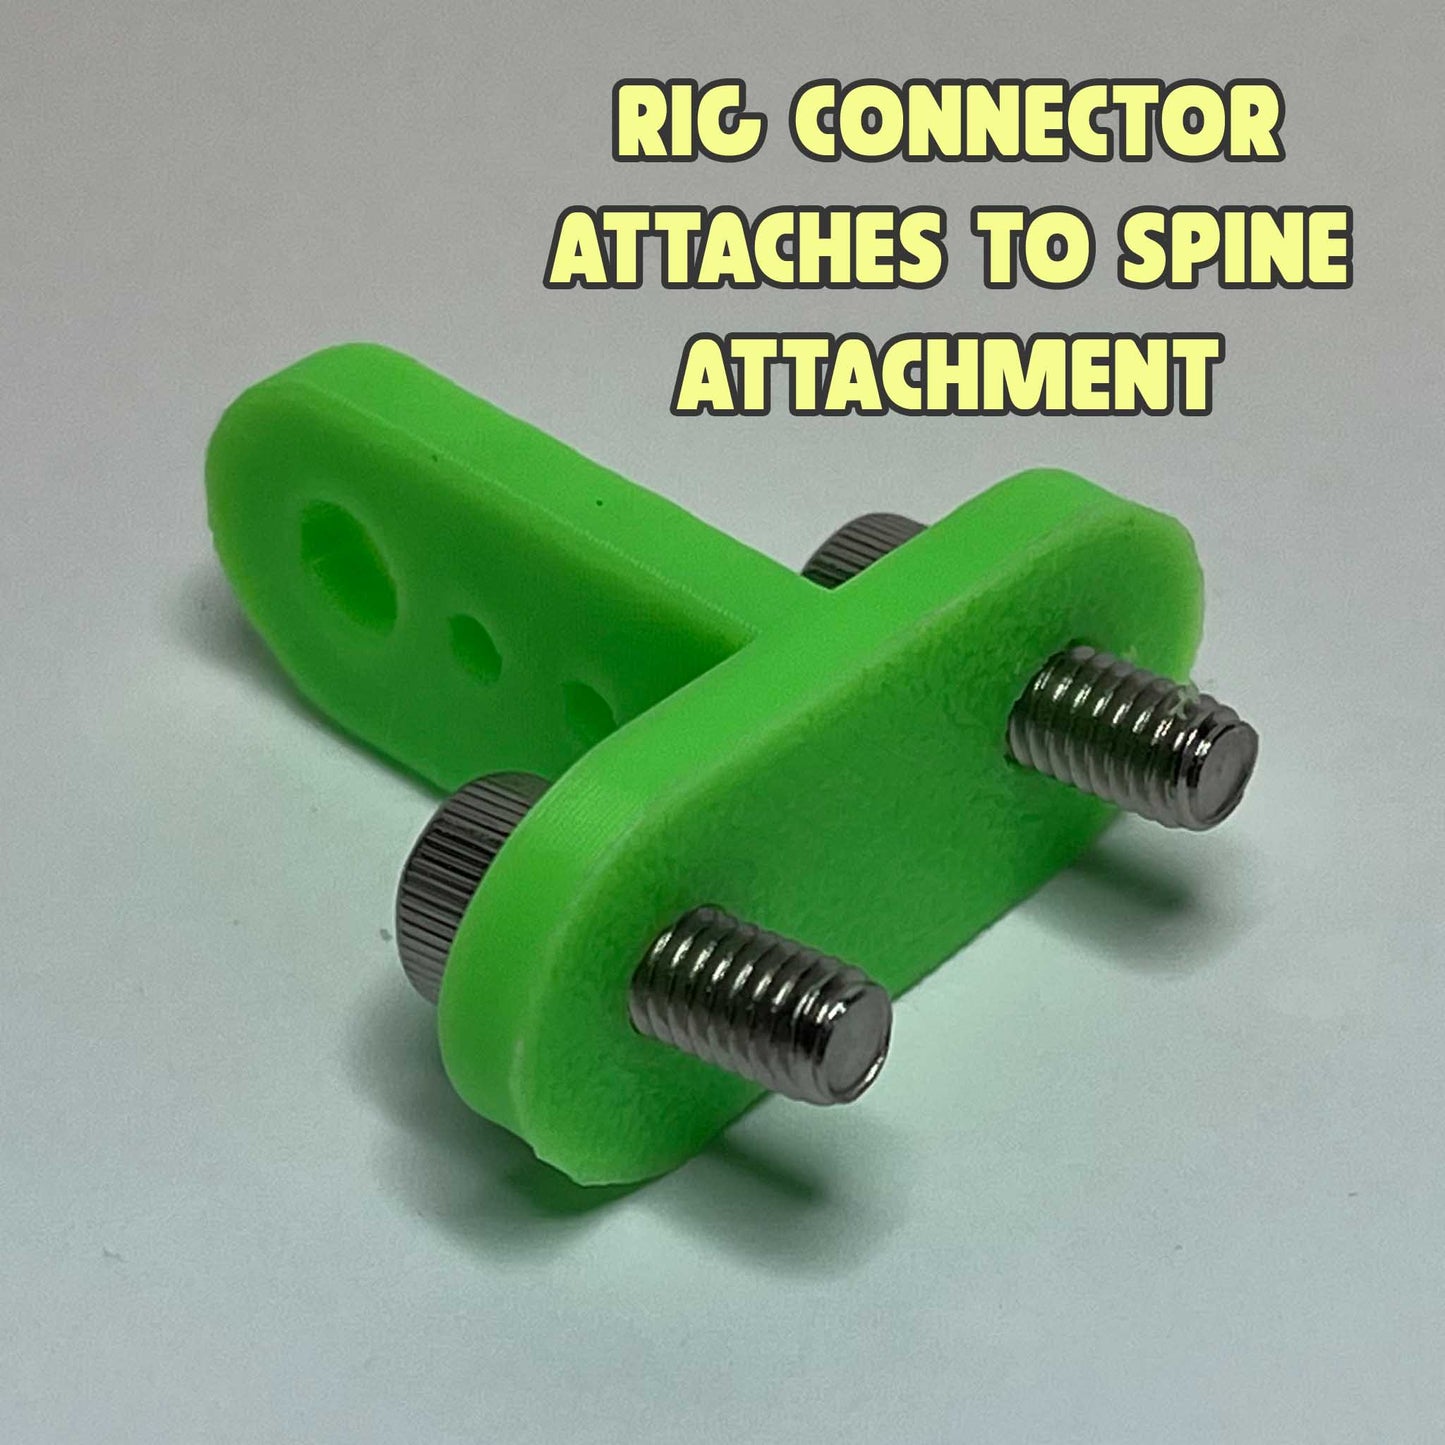 Bend-D's Flying Rig Connector